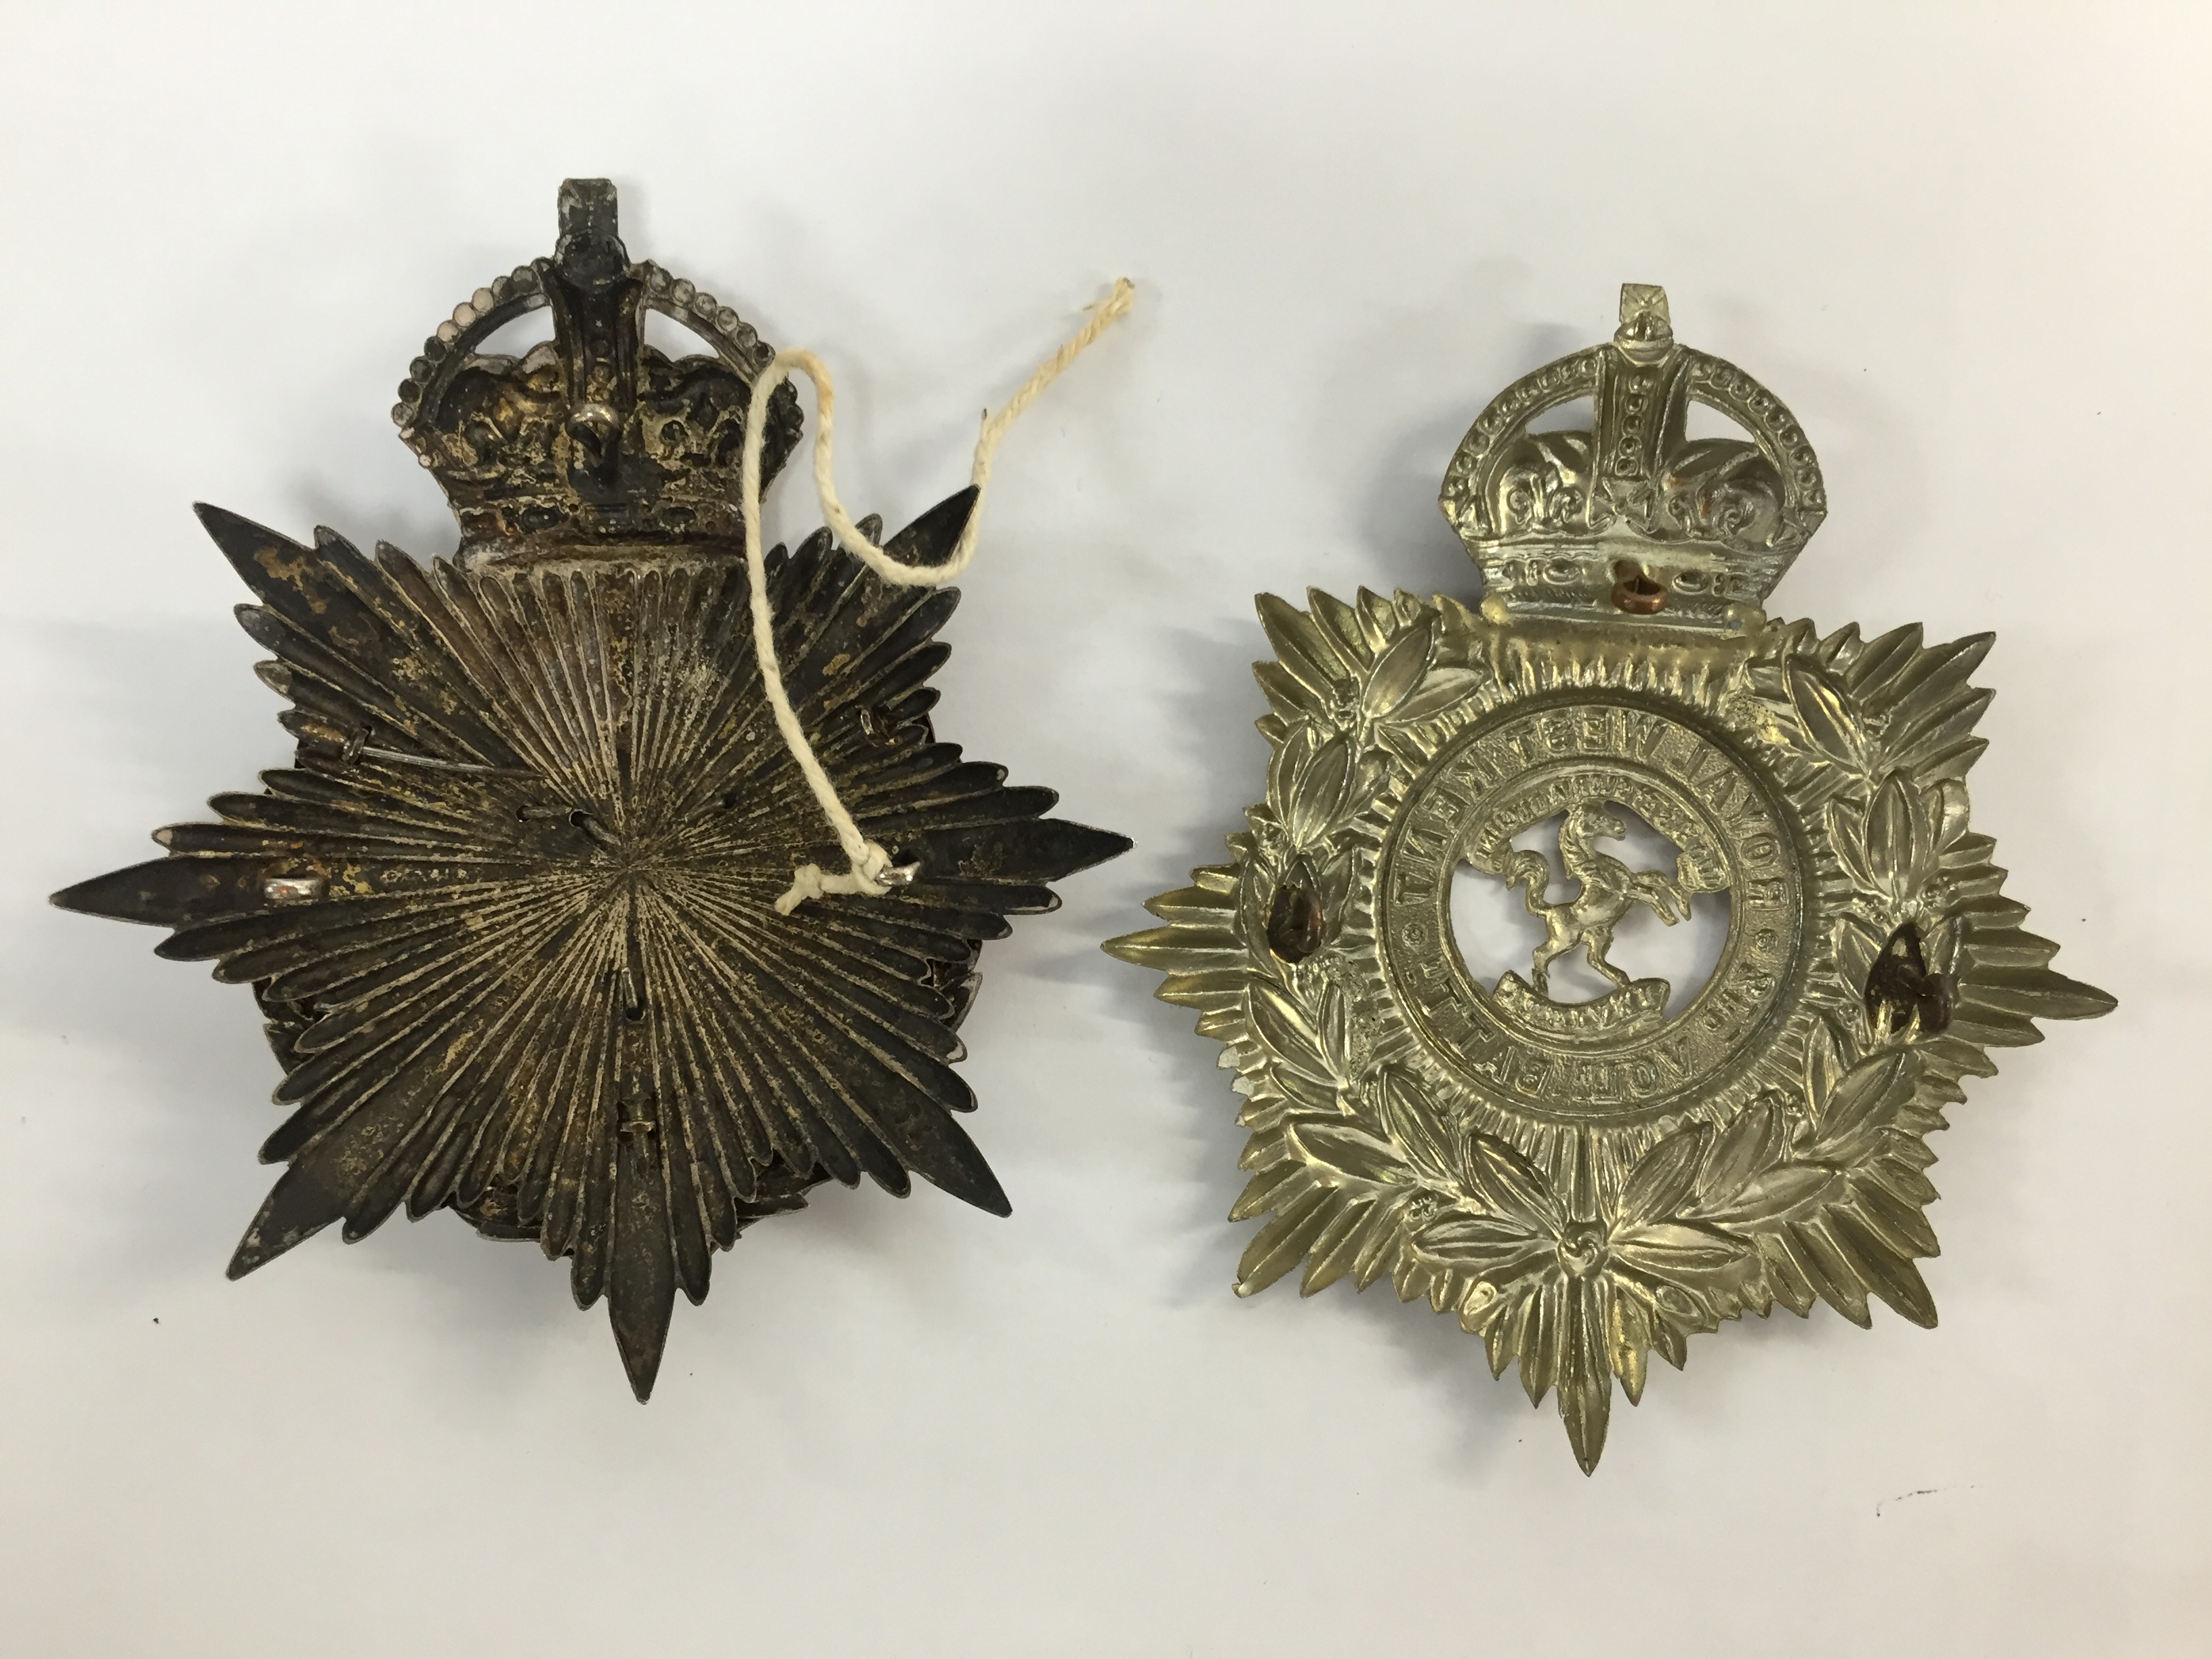 COLLECTION OF KENT RELATED BADGES HELMET PLATES AND BUTTONS INCLUDING ROYAL WEST KENT 3RD VOLUNTEER - Image 4 of 6